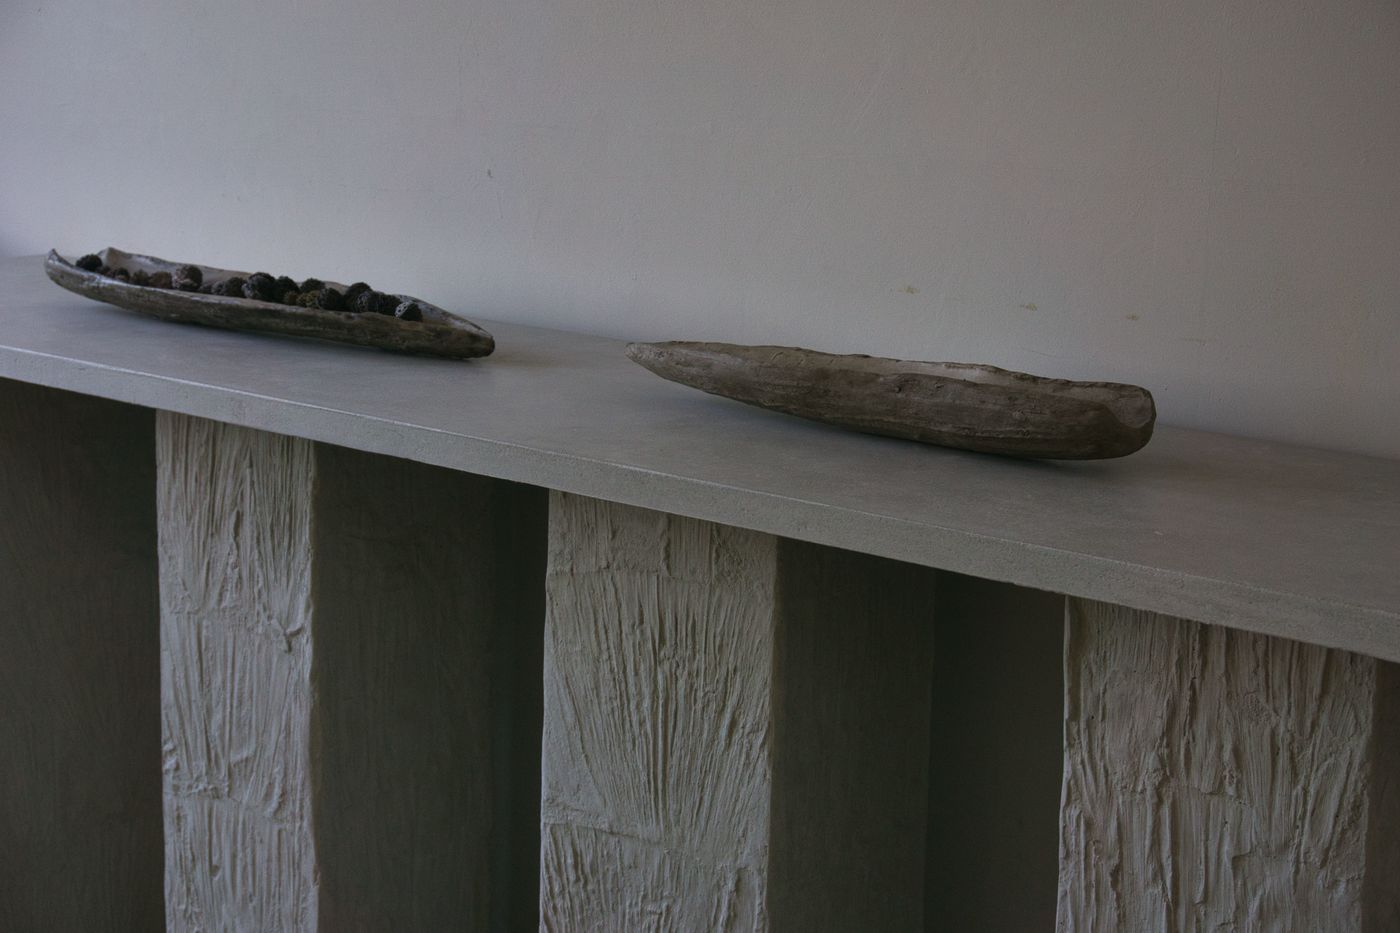 Concrete Console with Corn husk  Pillars and small concrete agave blade sculptures in grey